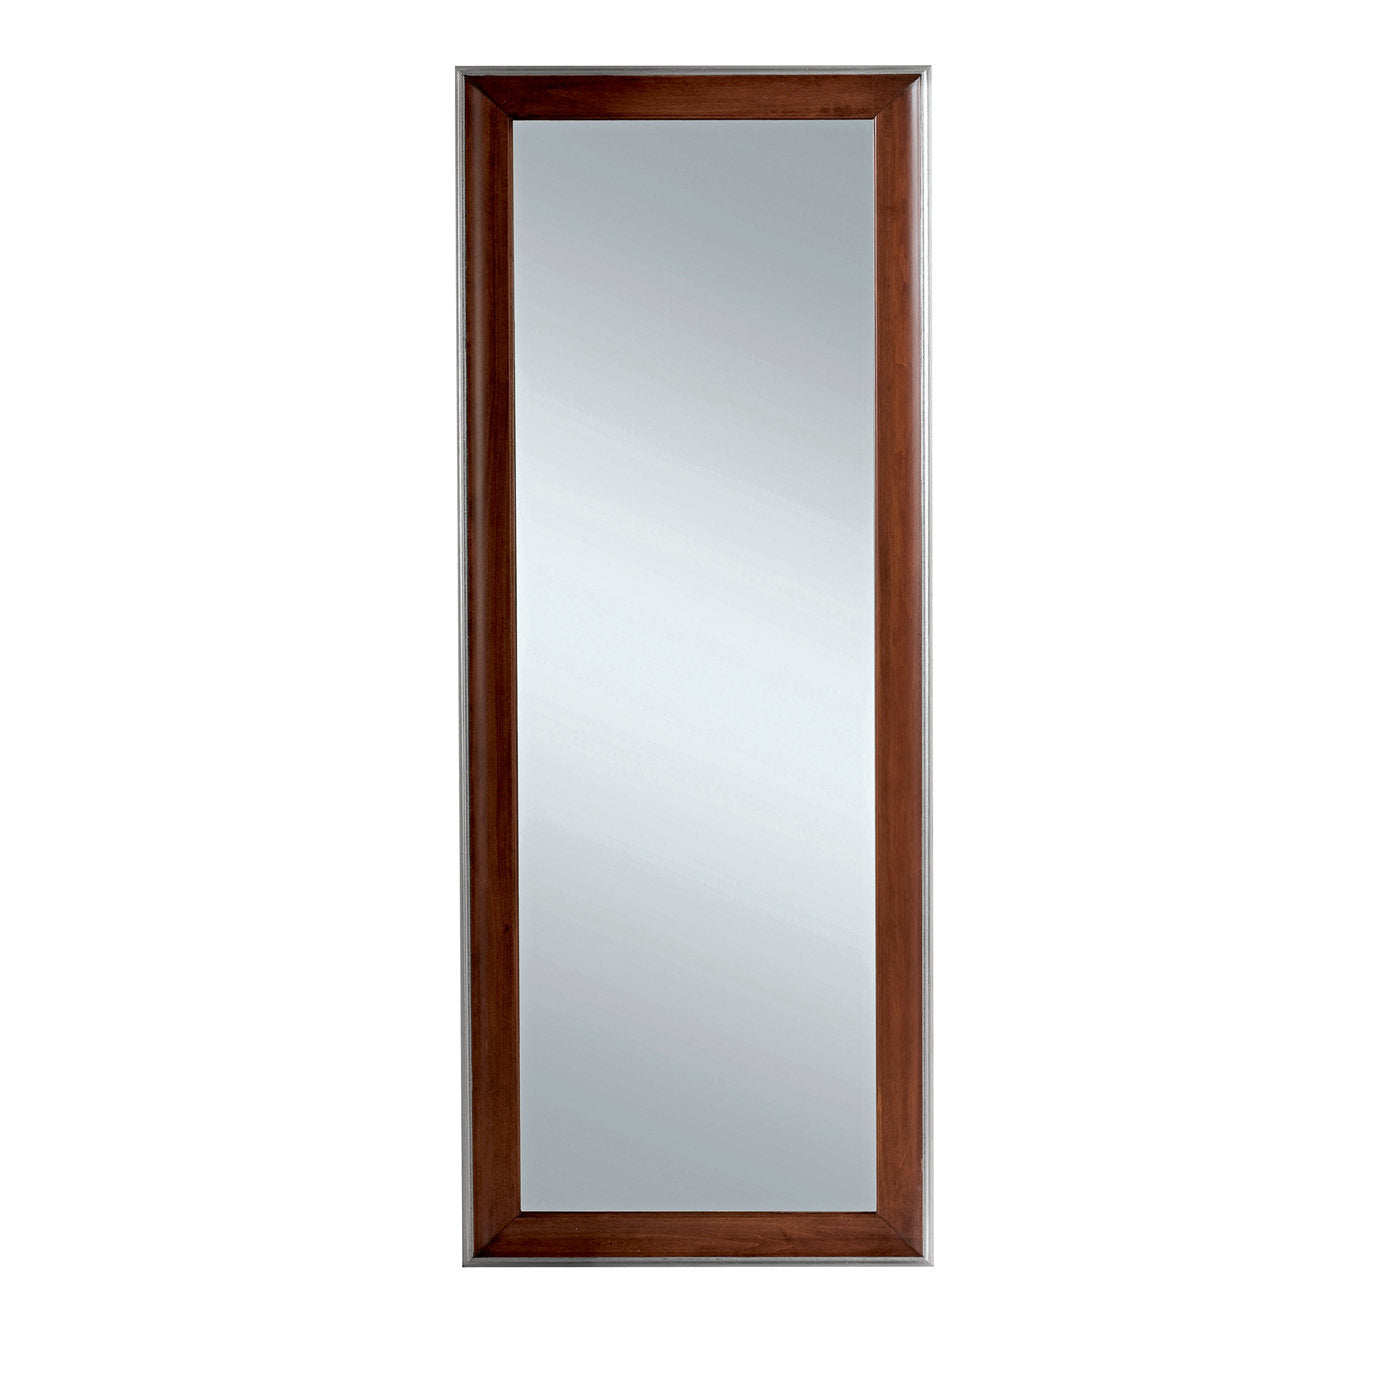 Rectangular Mirror with Brown Wooden Frame - Main view